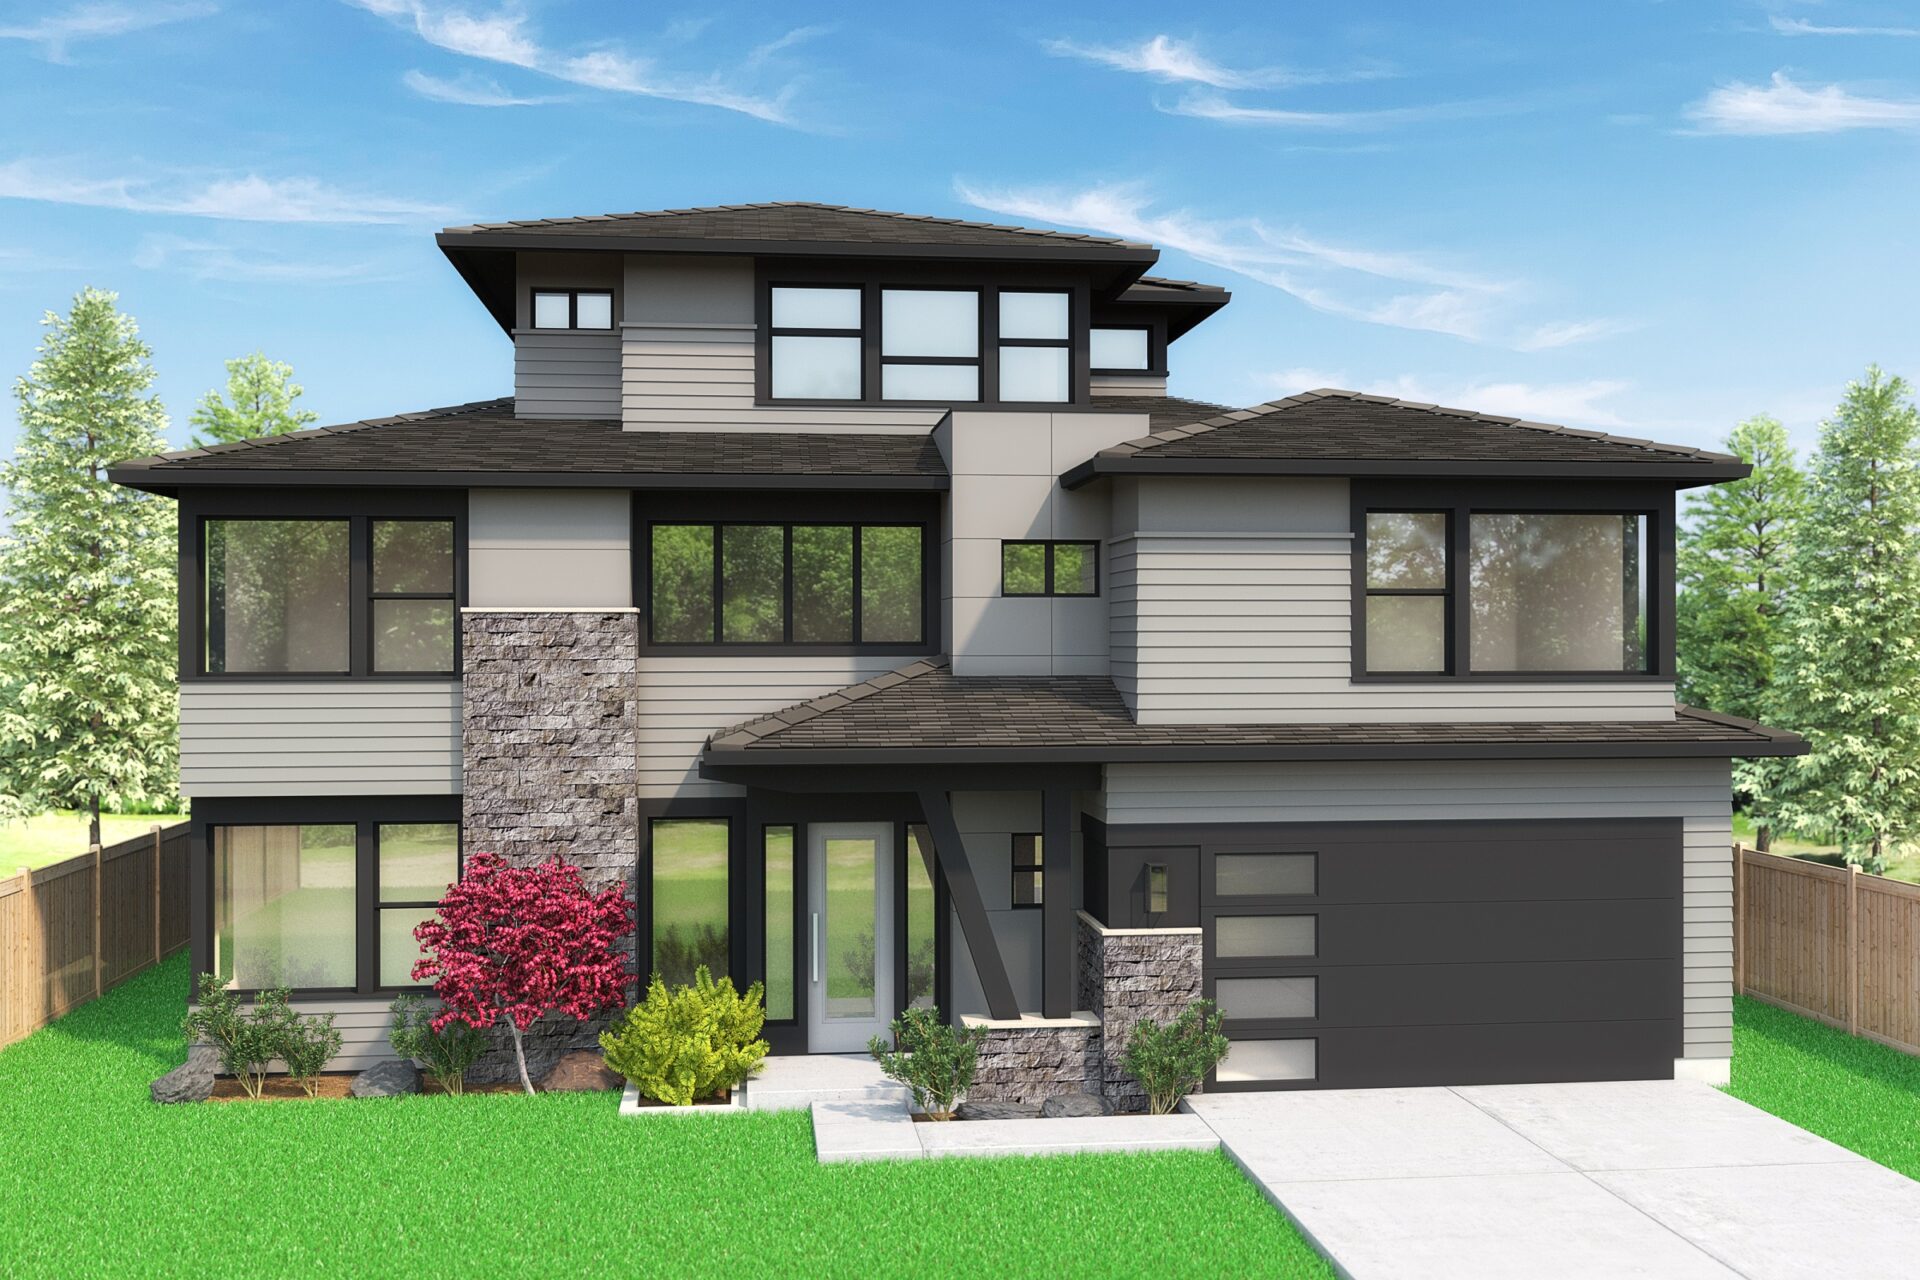 View our new luxury home construction on 509 129th Ave SE, in Bellevue, WA from MN Custom Homes